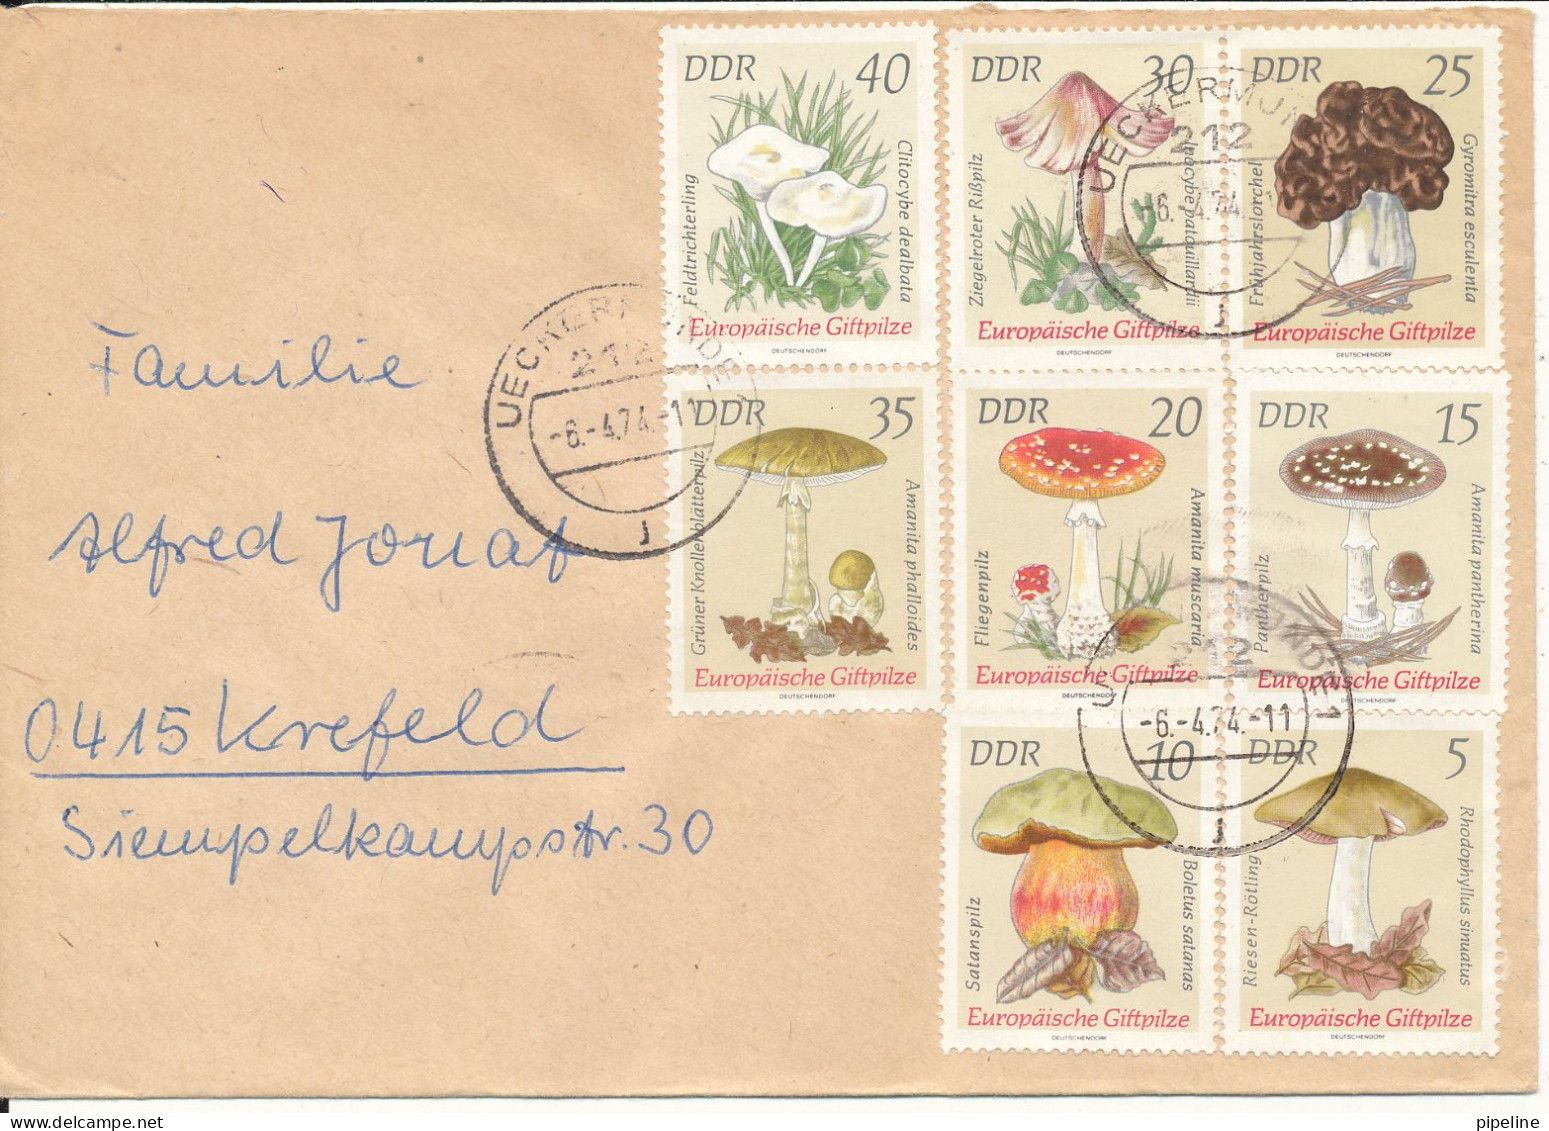 Germany DDR Registered Cover Ueckermünde 6-4-1974 With Minisheet And Stamps Also On The Backside Of The Cover - Covers & Documents